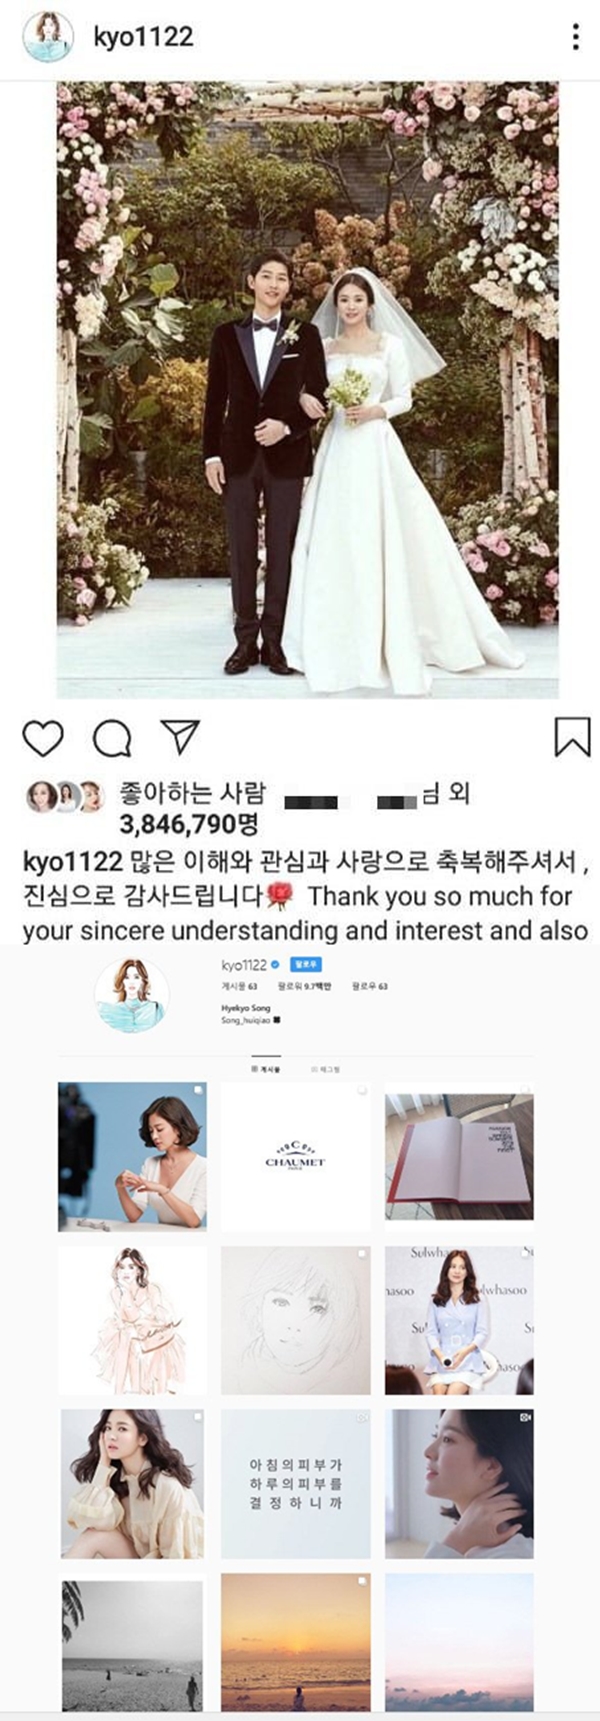 Song Hye-kyo erased the traces of her ex-husband Song Joong-ki on SNS while the divorce process of Actors Song Joong-ki and Song Hye-kyo was completed.On the morning of the 22nd, the 12th independent housework (Jang Jin-young, the chief judge) of the Seoul Family Court held the date of the divorce mediation of Song Hye-kyo and Song Joong-ki privately and ruled on the establishment of the mediation.The court said that it could not disclose specific details about the adjustment, and Song Hye-kyo said, There is no alimony and property division.In this regard, Song Hye-kyo deleted the photos taken with Song Joong-ki from SNS and attracted attention. Until the day before, there were traces of his SNS including wedding photos and Song Joong-ki.The two men, who developed into a lover relationship through the KBS2 drama Dawn of the Sun, married in October 2017.However, after a year and eight months of wedding ceremony, he was shocked by the breakup.